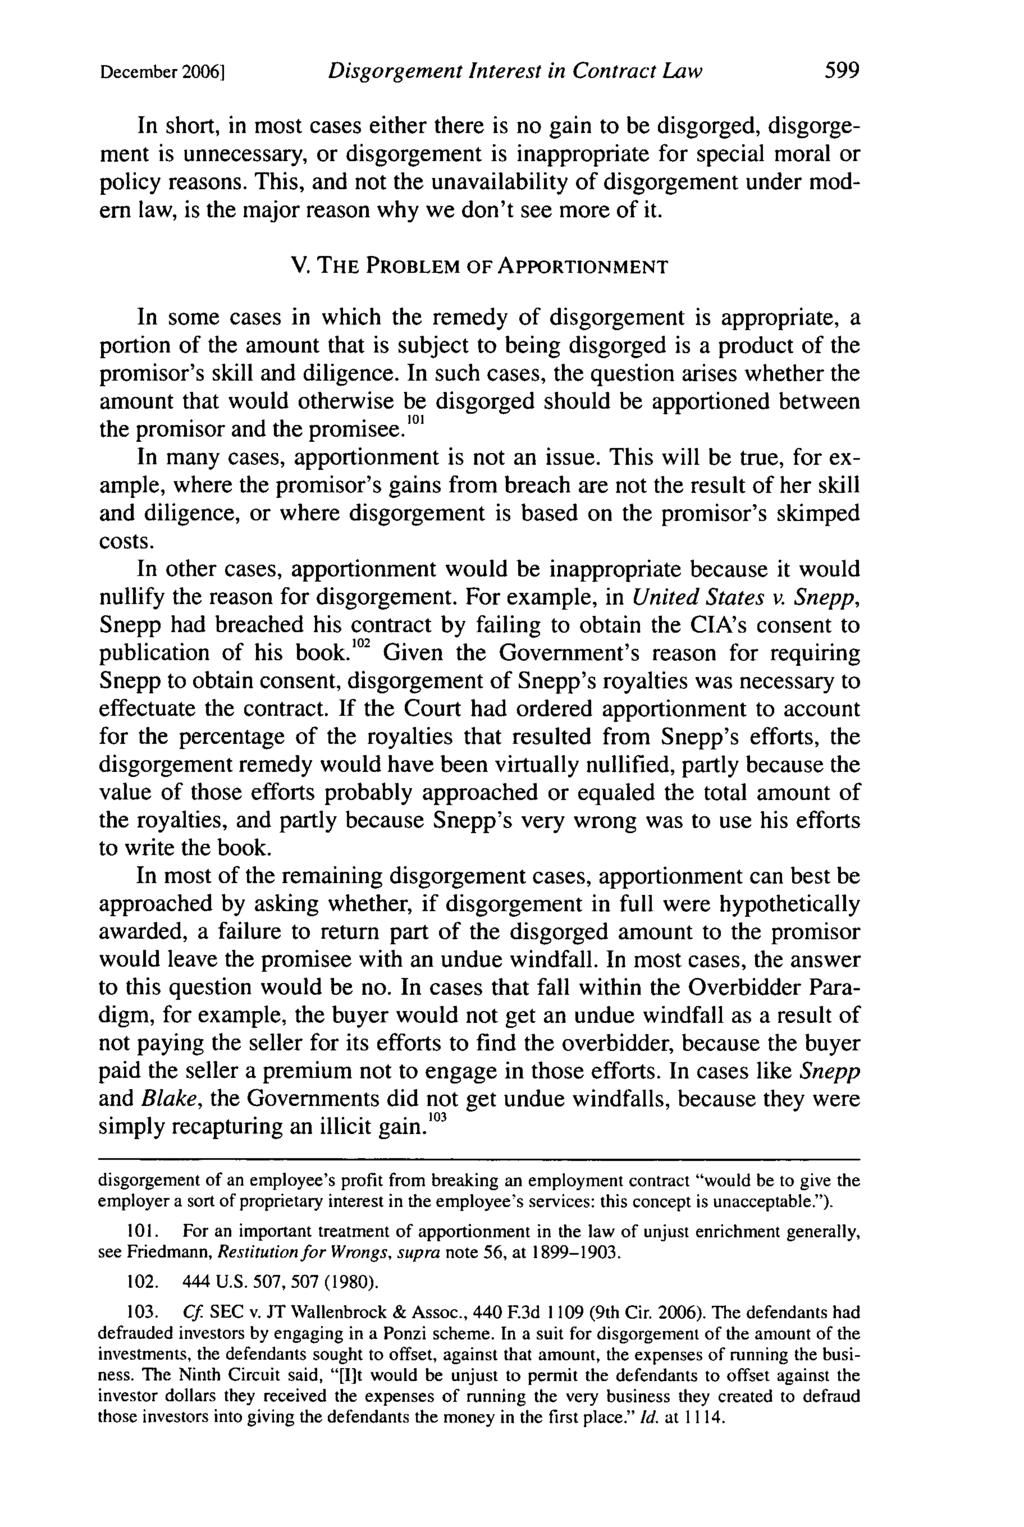 December 2006] Disgorgement Interest in Contract Law In short, in most cases either there is no gain to be disgorged, disgorgement is unnecessary, or disgorgement is inappropriate for special moral